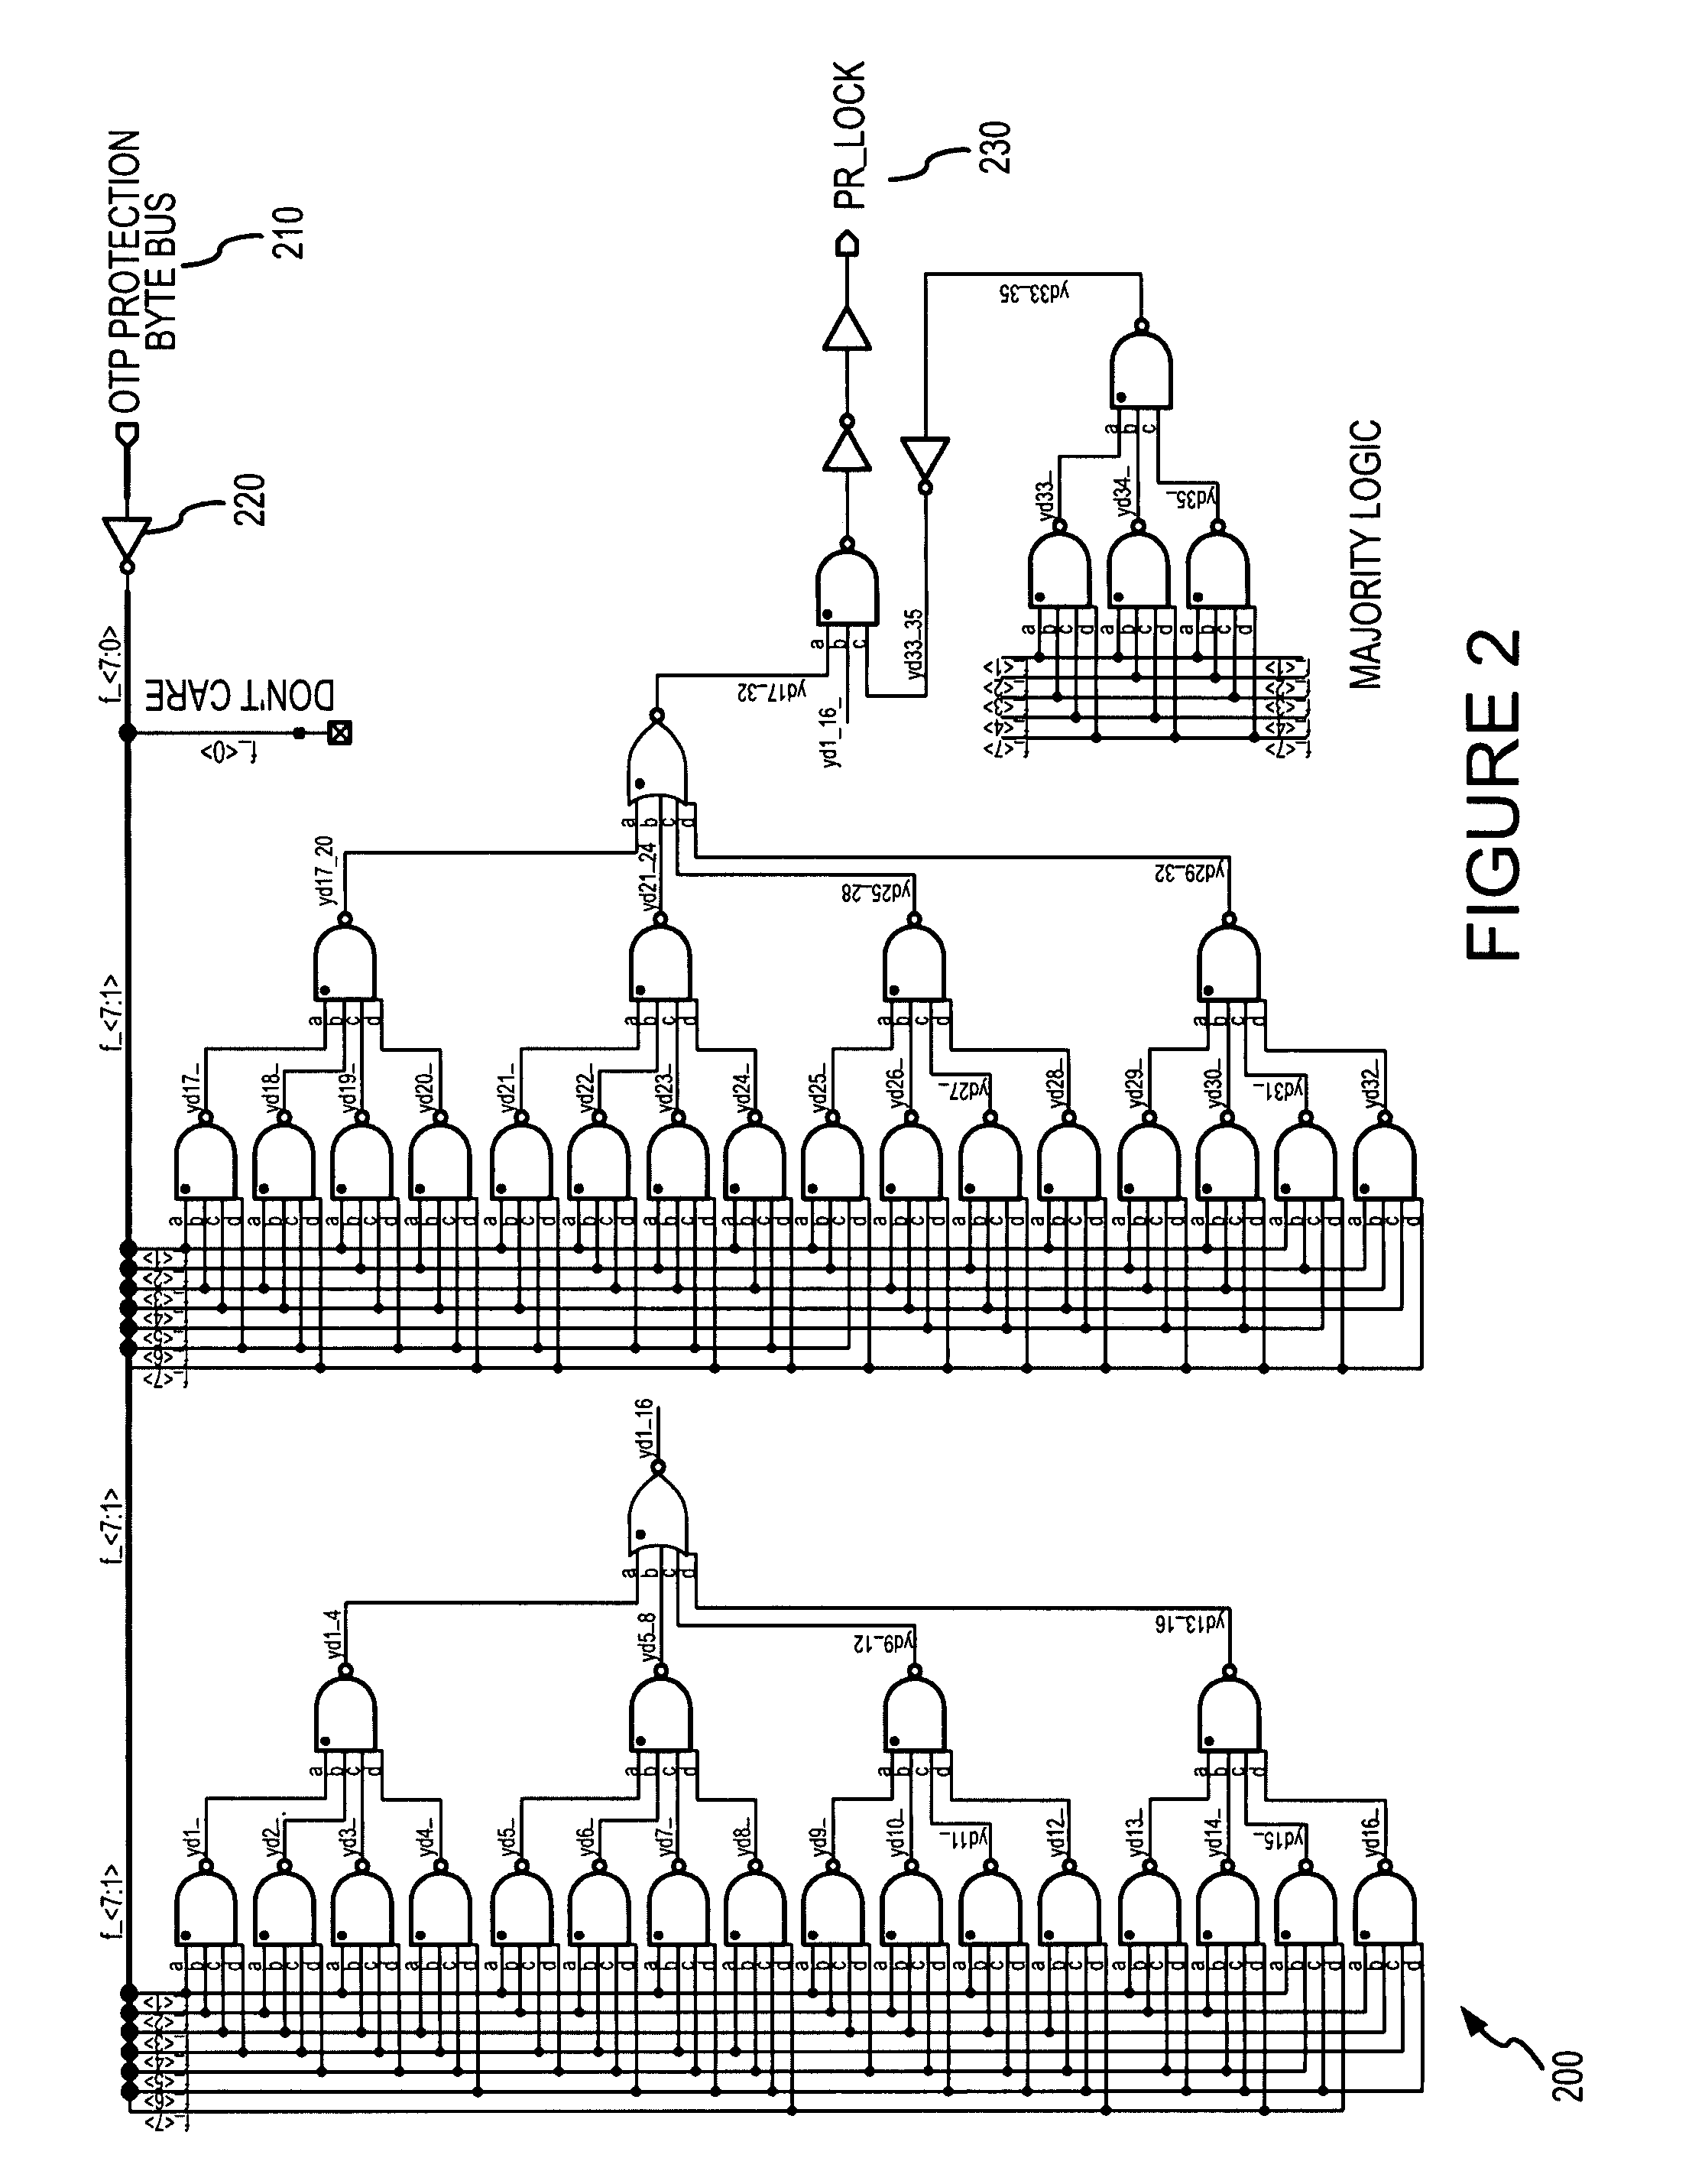 Memory area protection system and methods